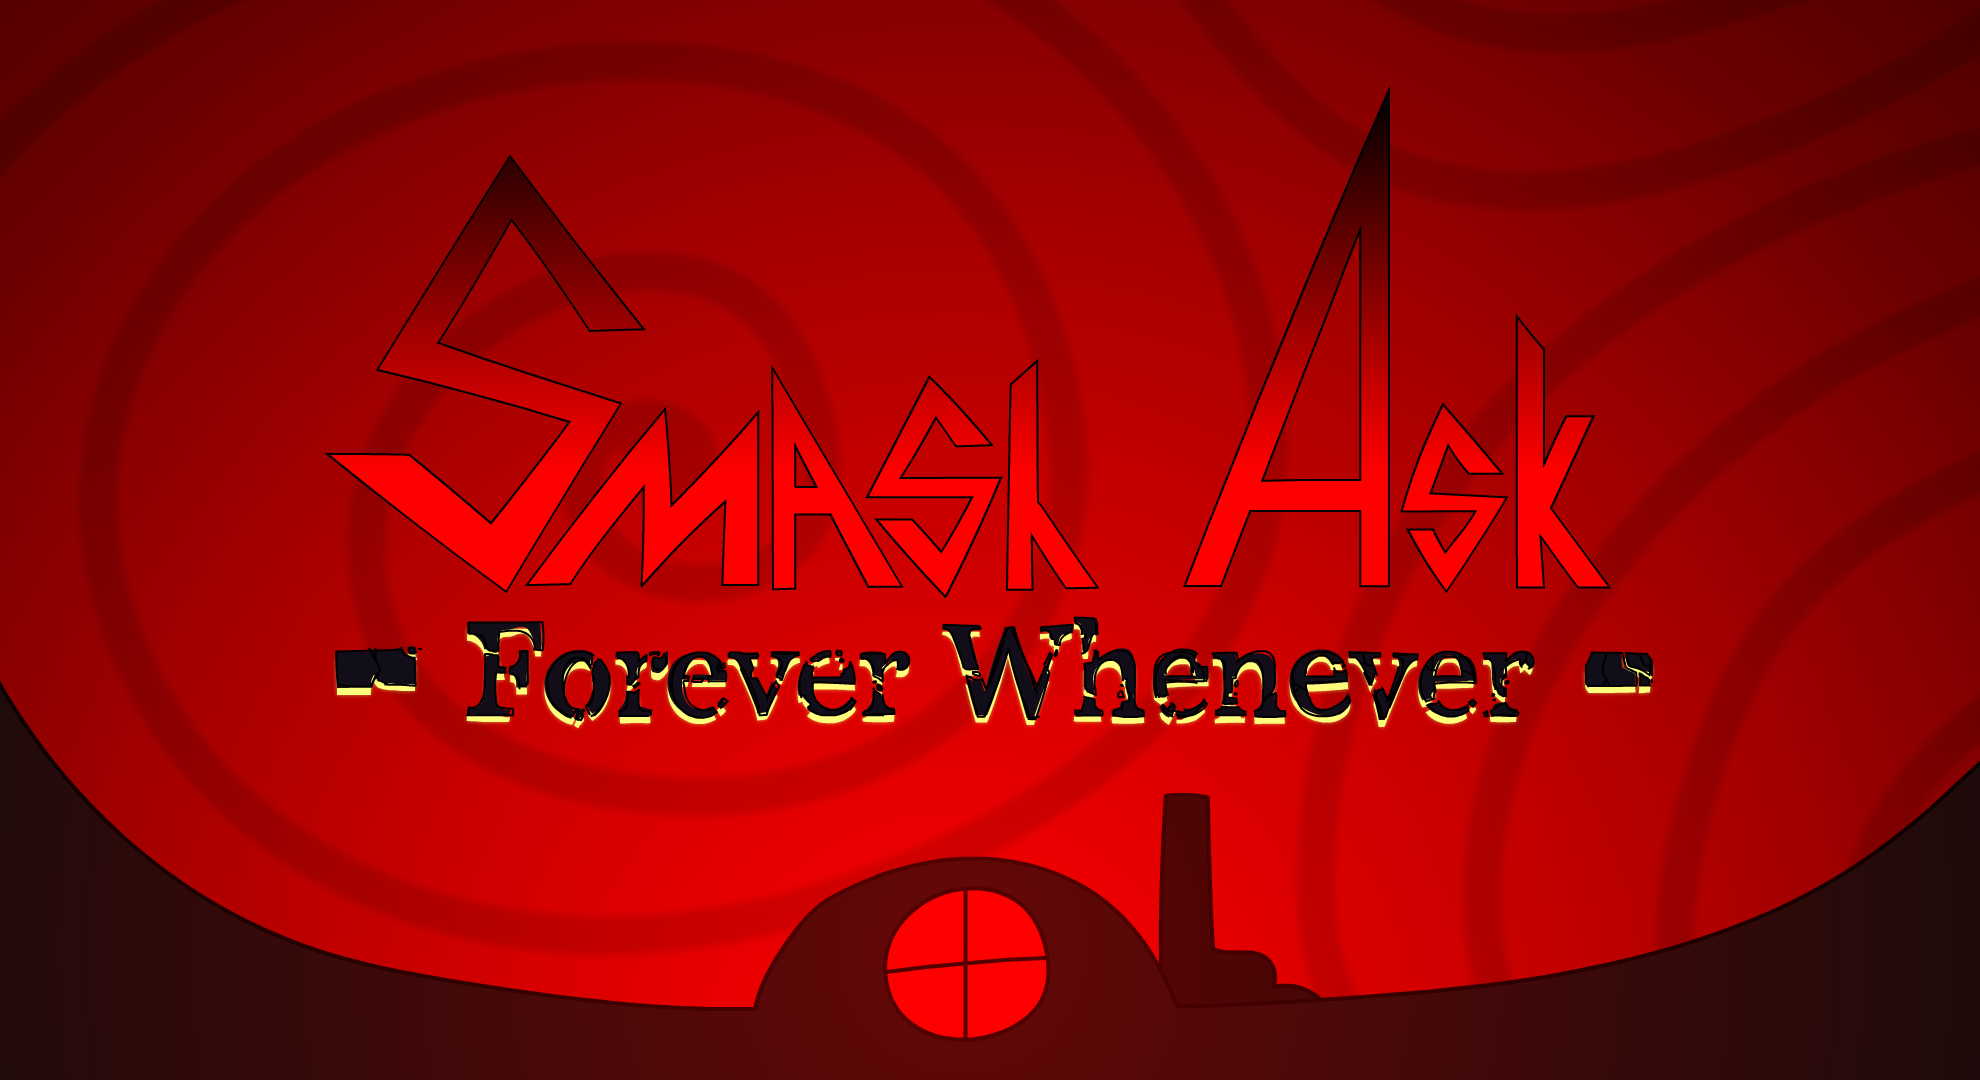 Smash Ask: Forever Whenever